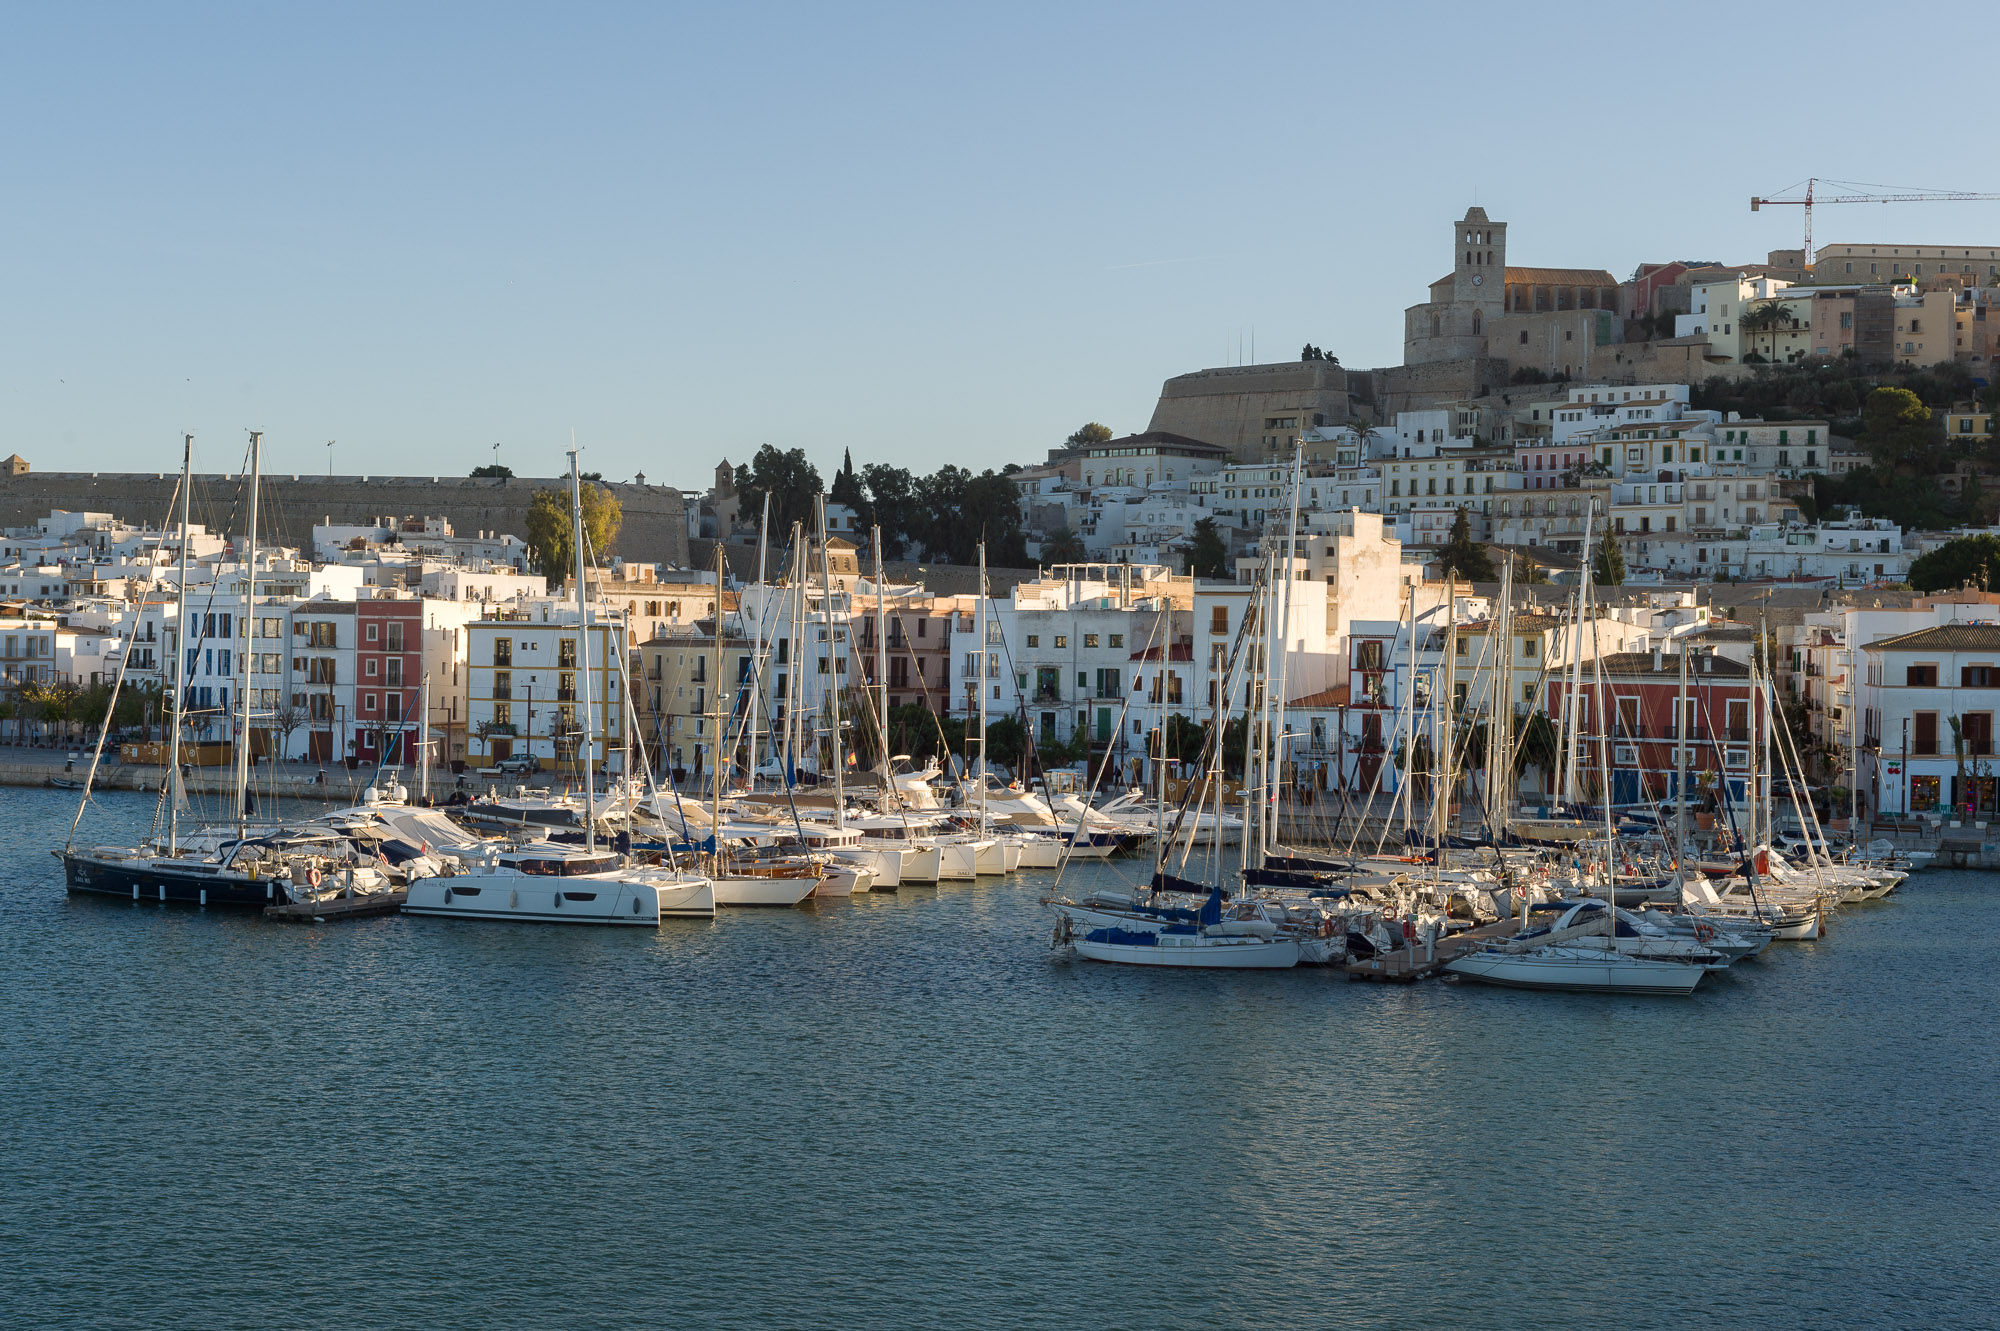 The APB is putting the management of the moorings on the western quay of Ibiza Port out to public tender